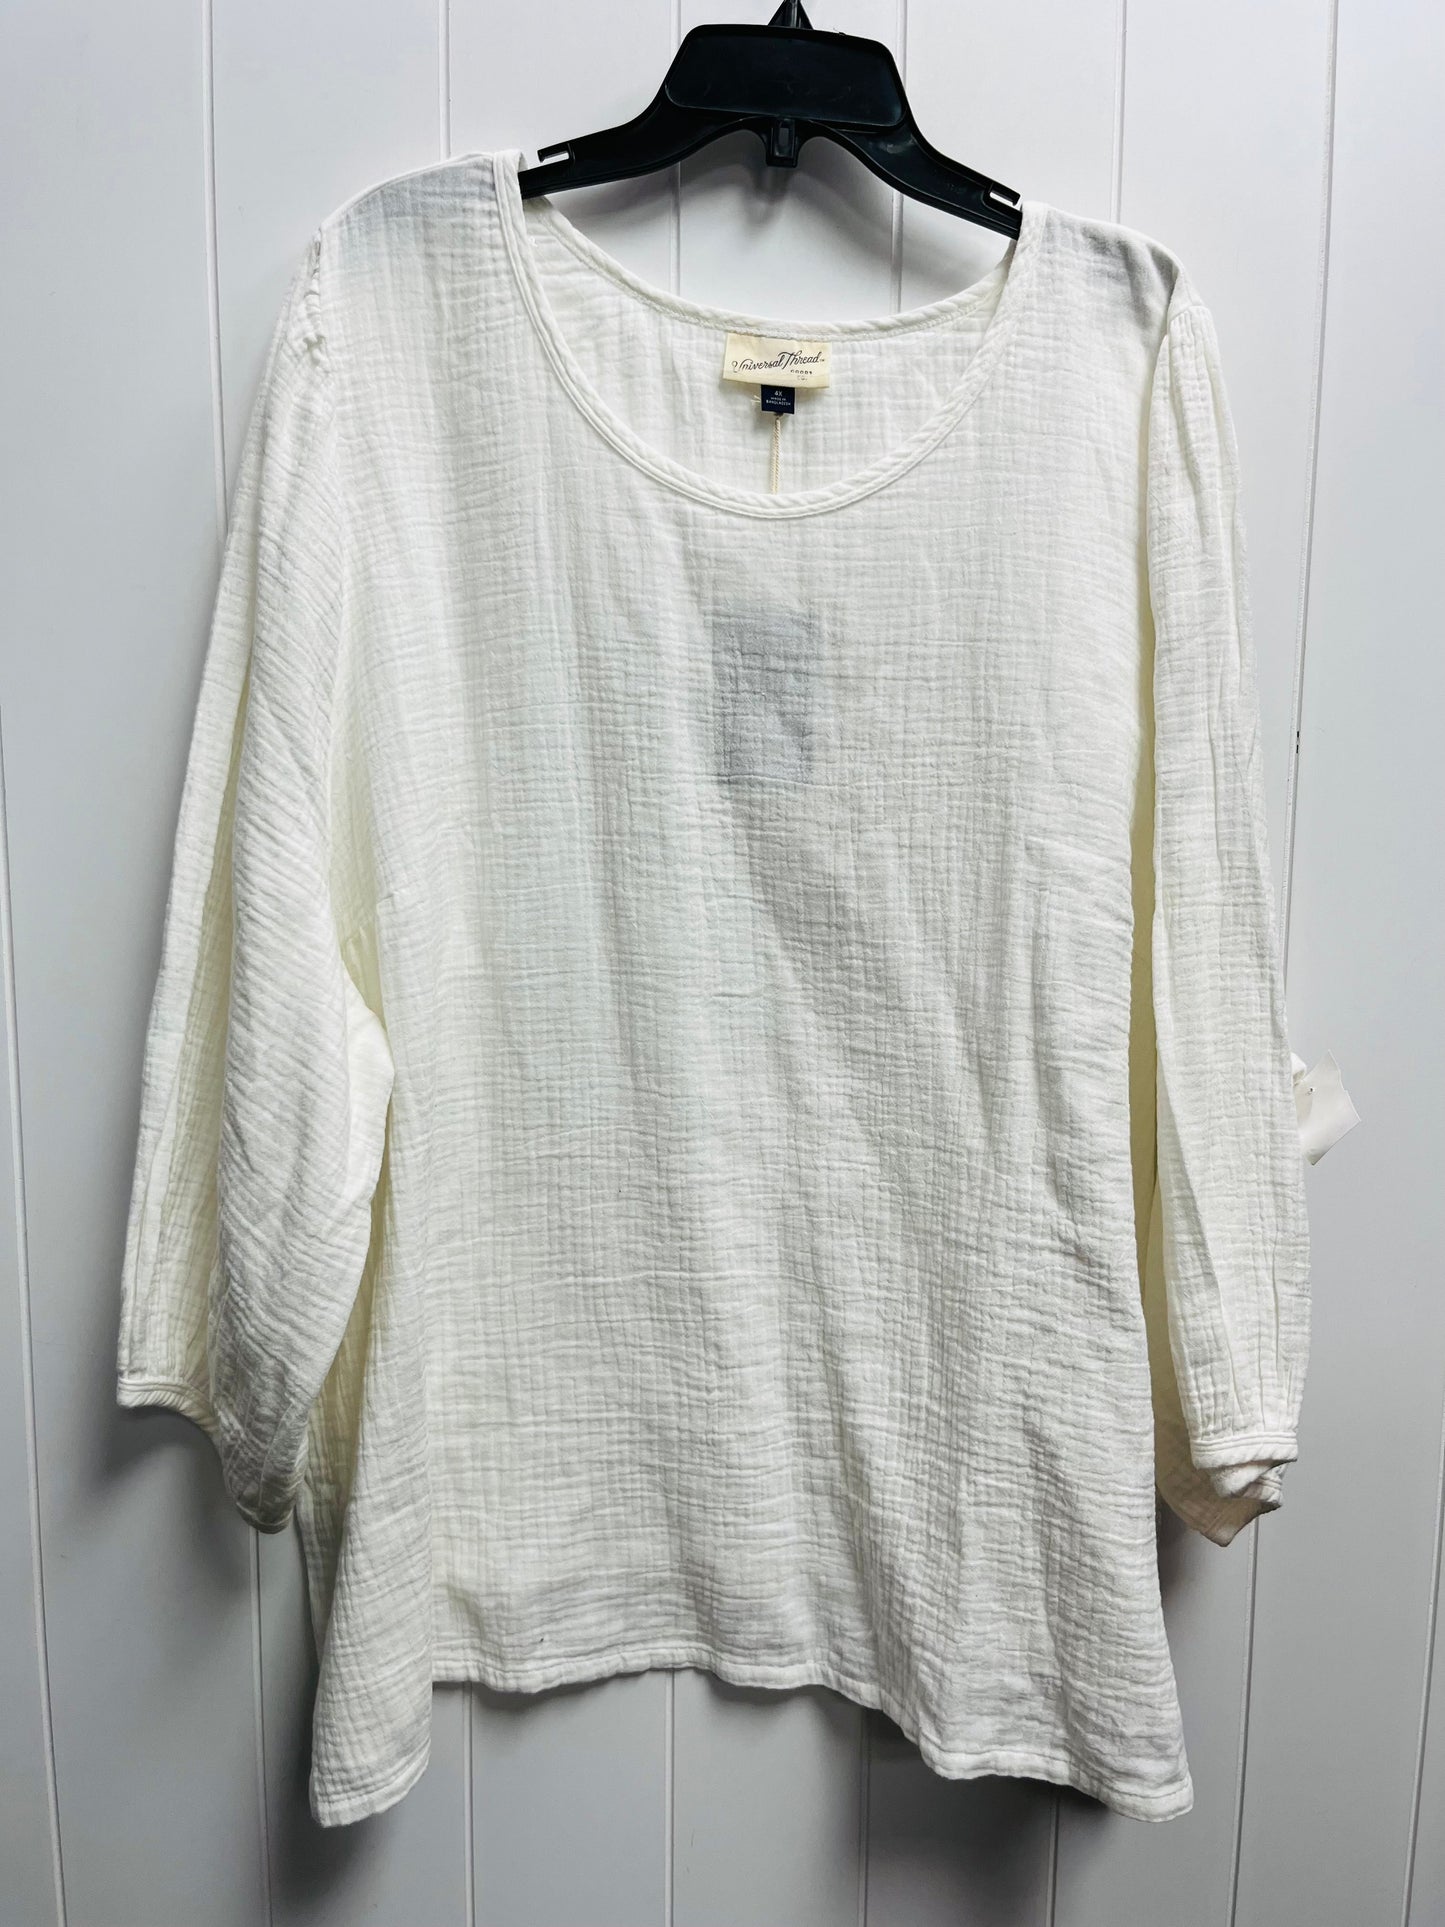 White Top Long Sleeve Universal Thread, Size 4x